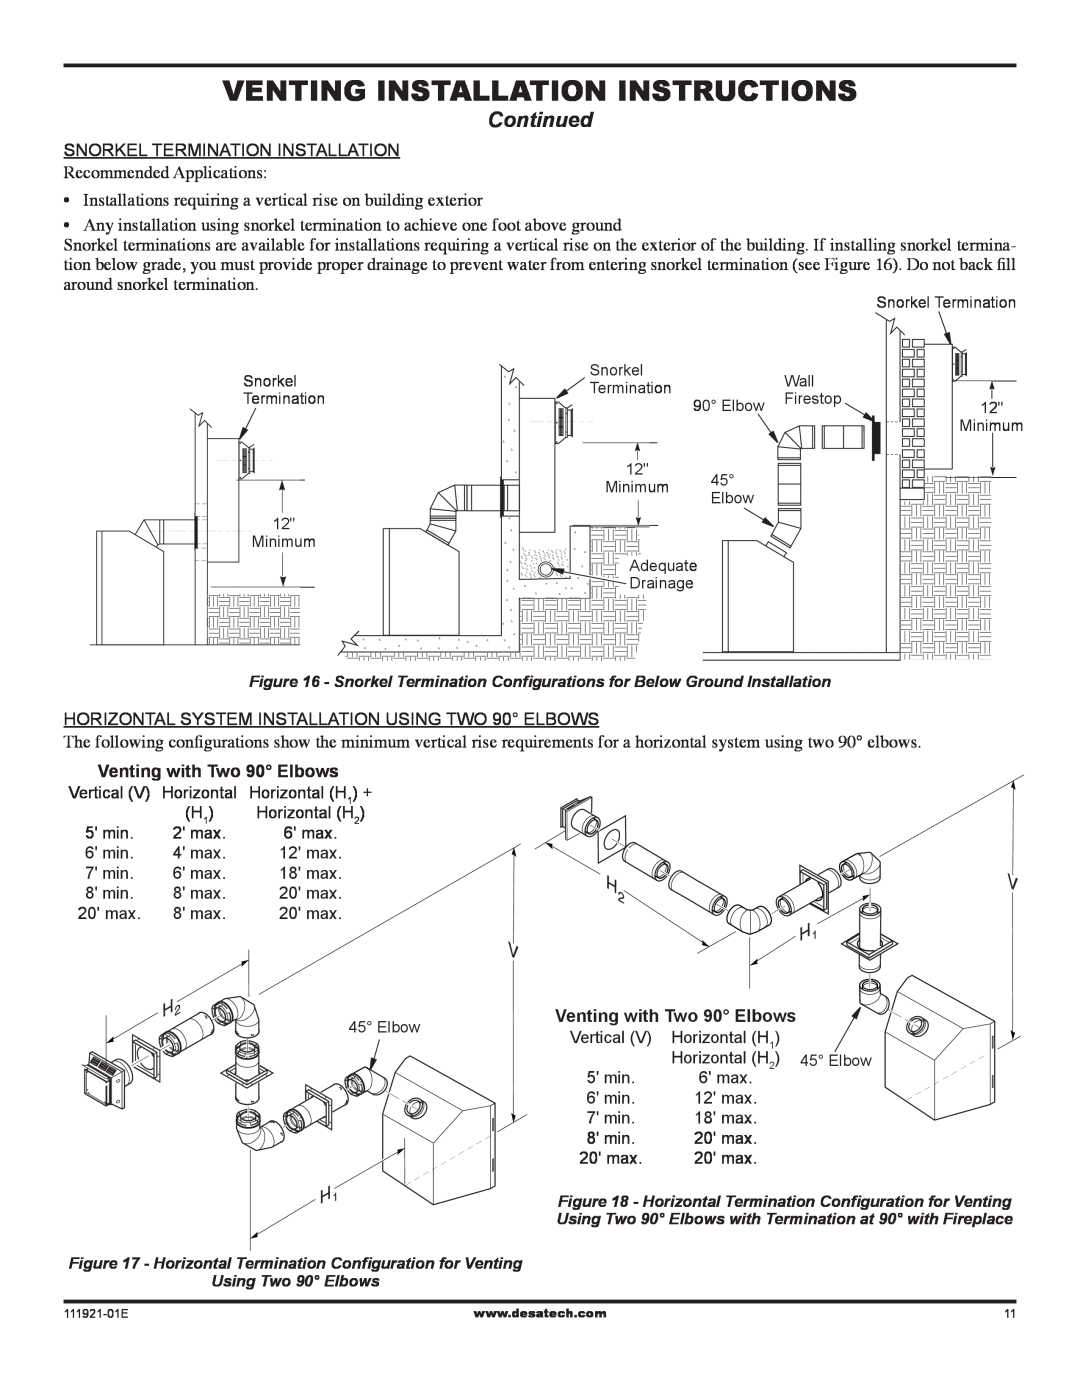 Desa (V)K42P installation manual Venting Installation instructions, Continued, Venting with Two 90 Elbows 